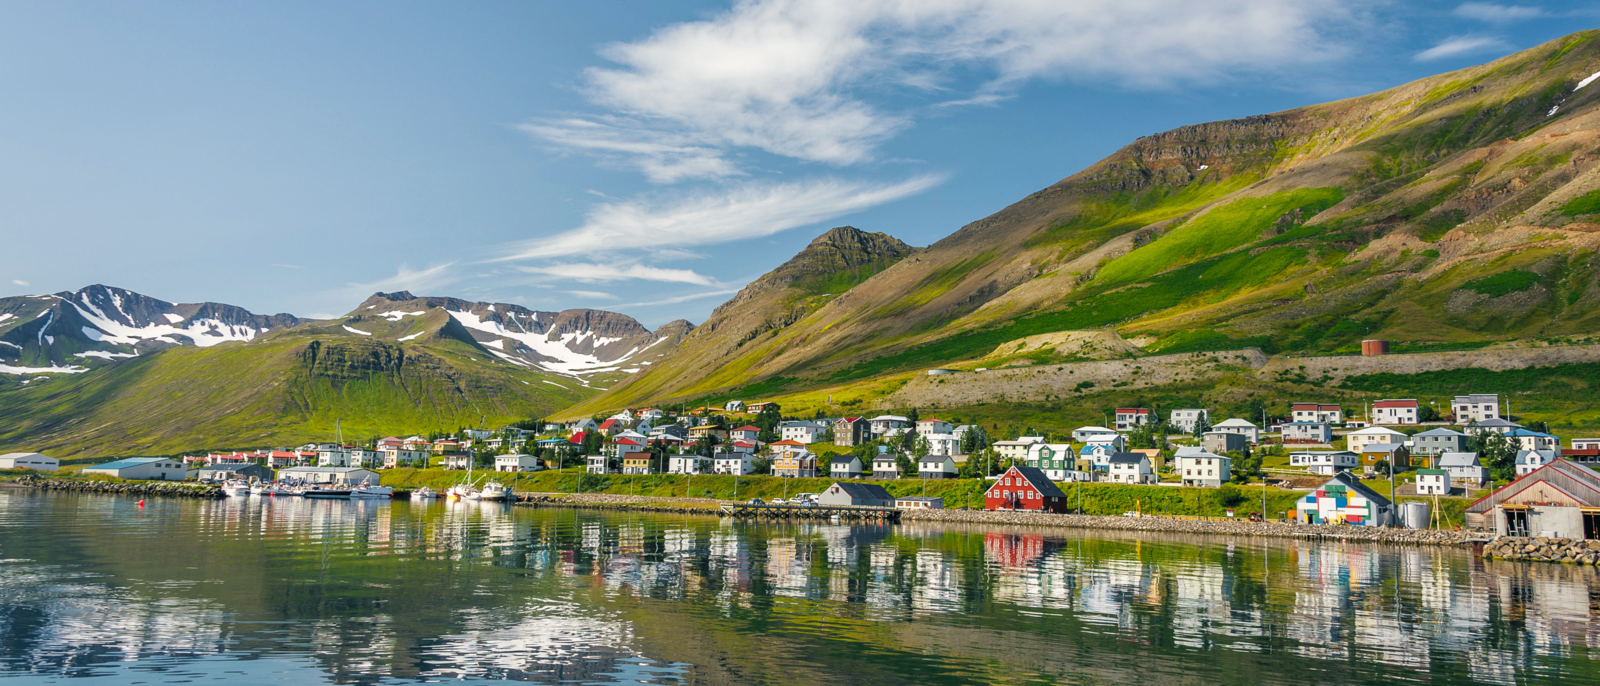 Siglufjordur, which in the 20th century was the herring capital of the world, is the northern most town in Iceland